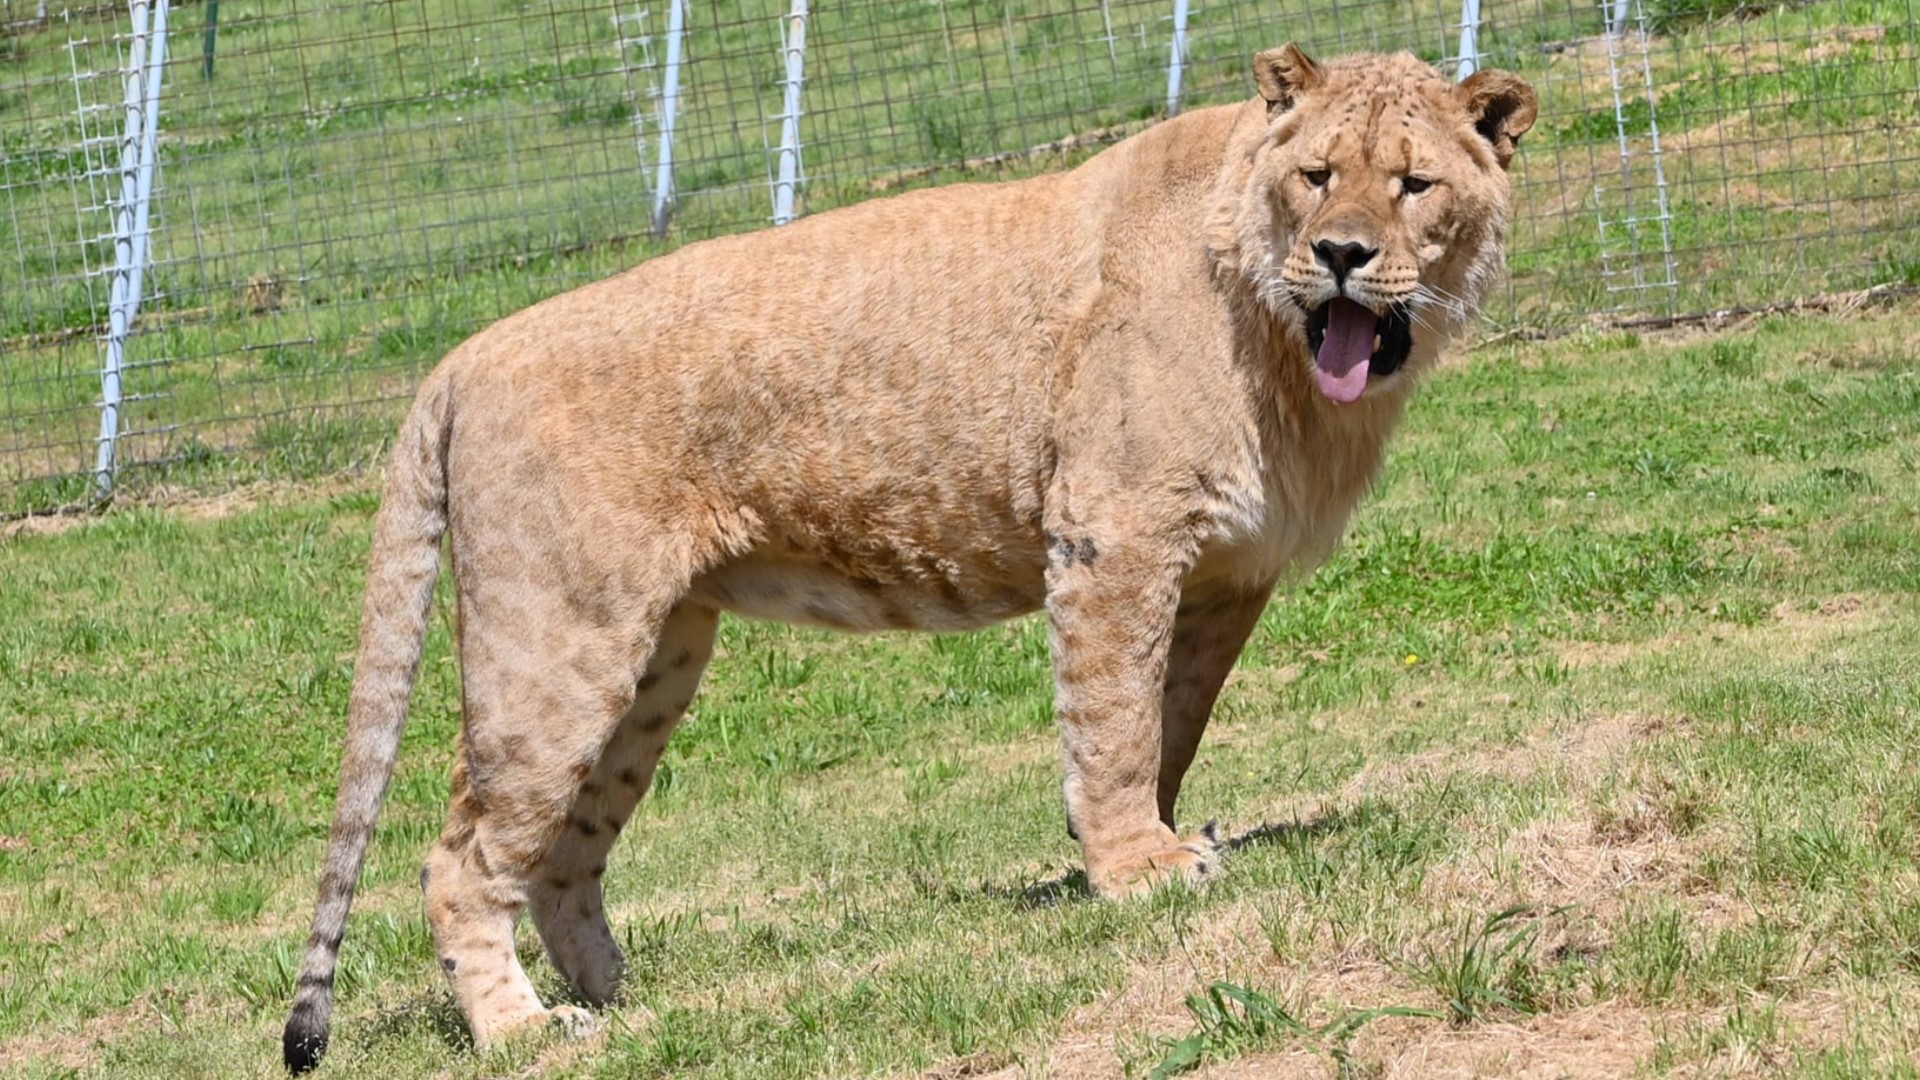 Almost 70 big cats were rescued who were once owned by Joe Exotic.